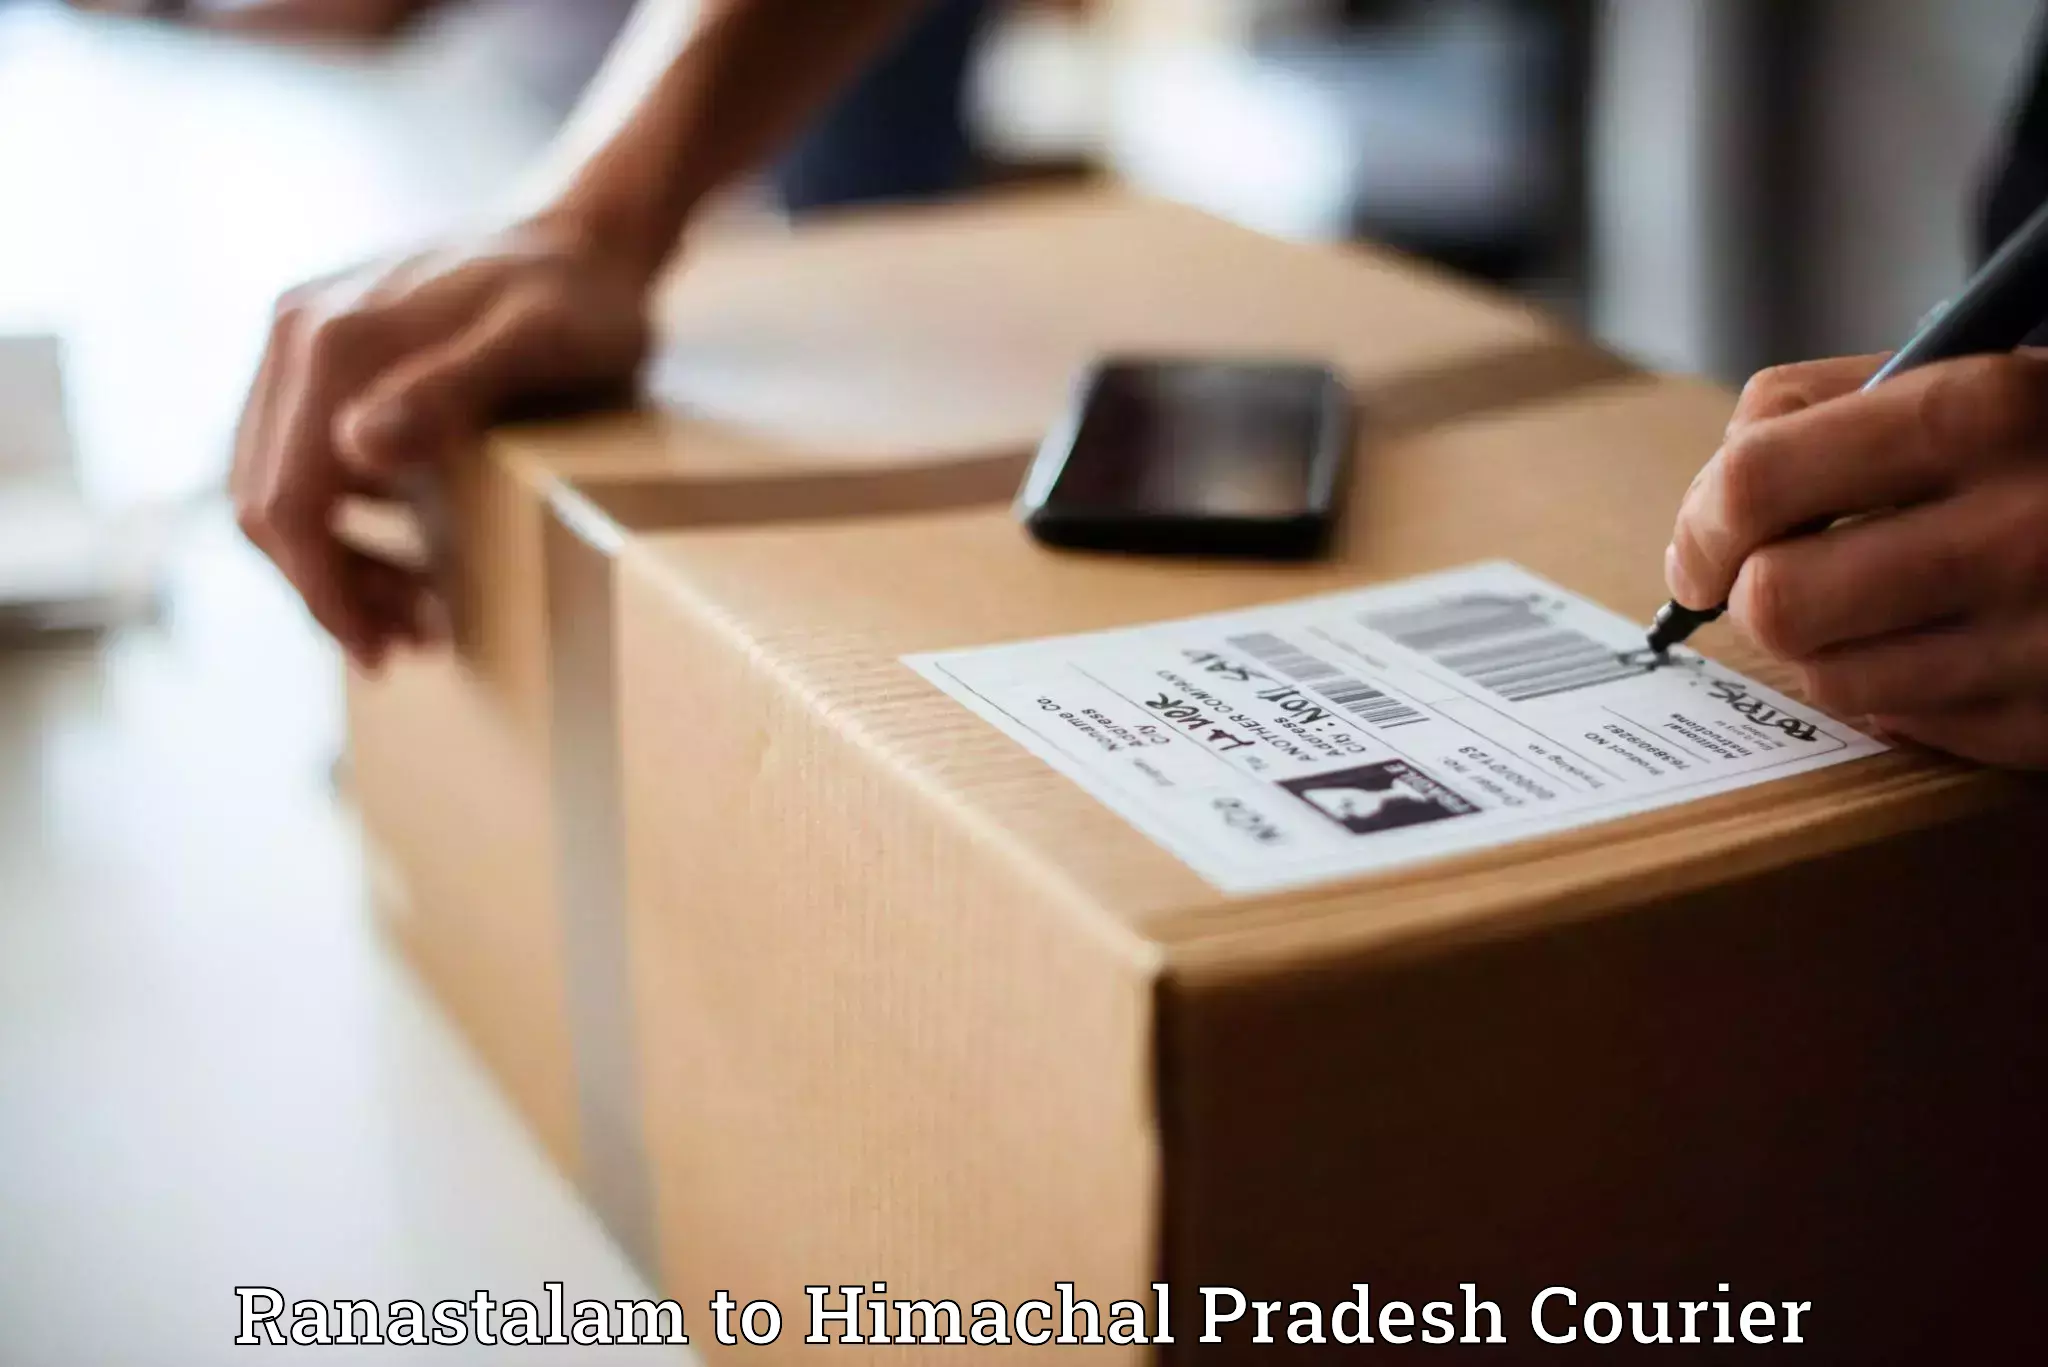 User-friendly courier app in Ranastalam to Jukhala